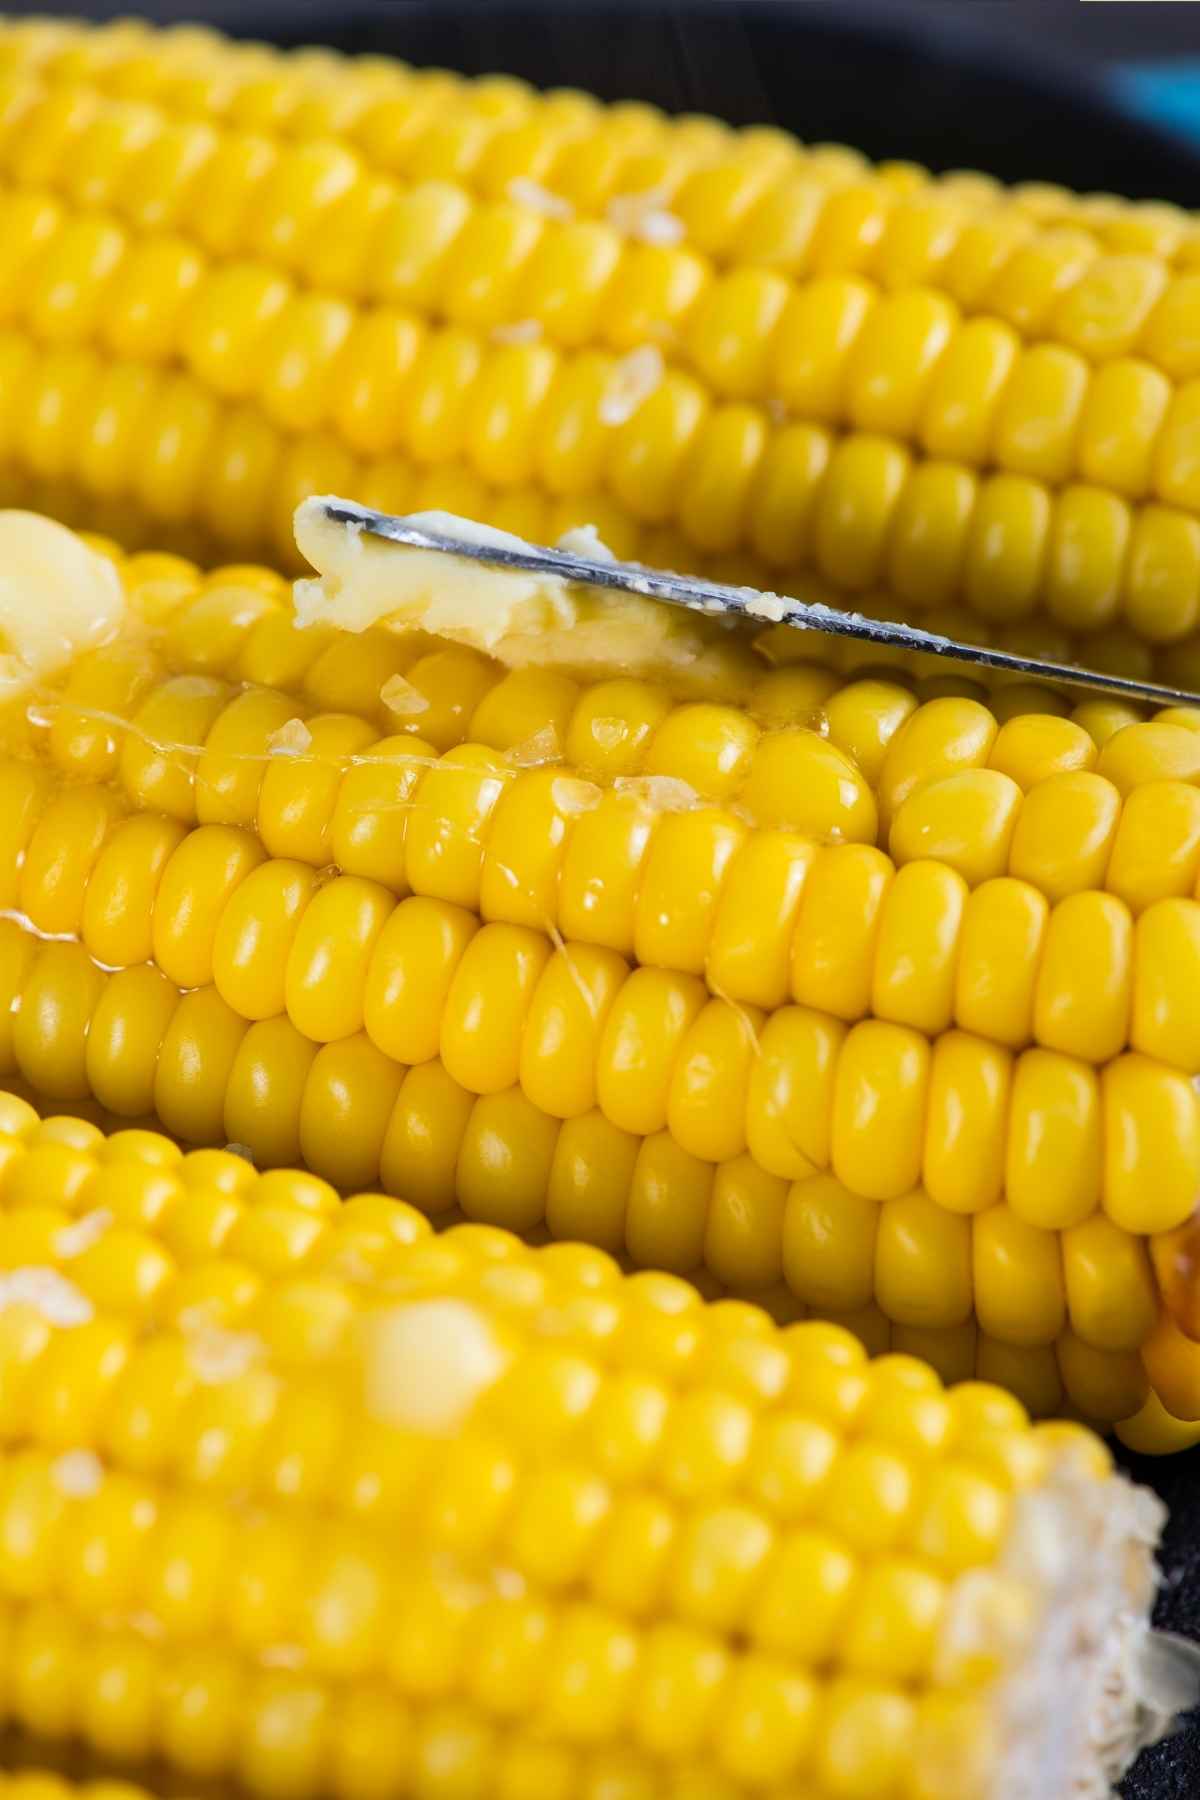 If corn on the cob is a family favorite in your household, give this delicious recipe for Corn On The Cob With Milk a try! Boiling the corn in milk enhances the sweet flavor of the corn.